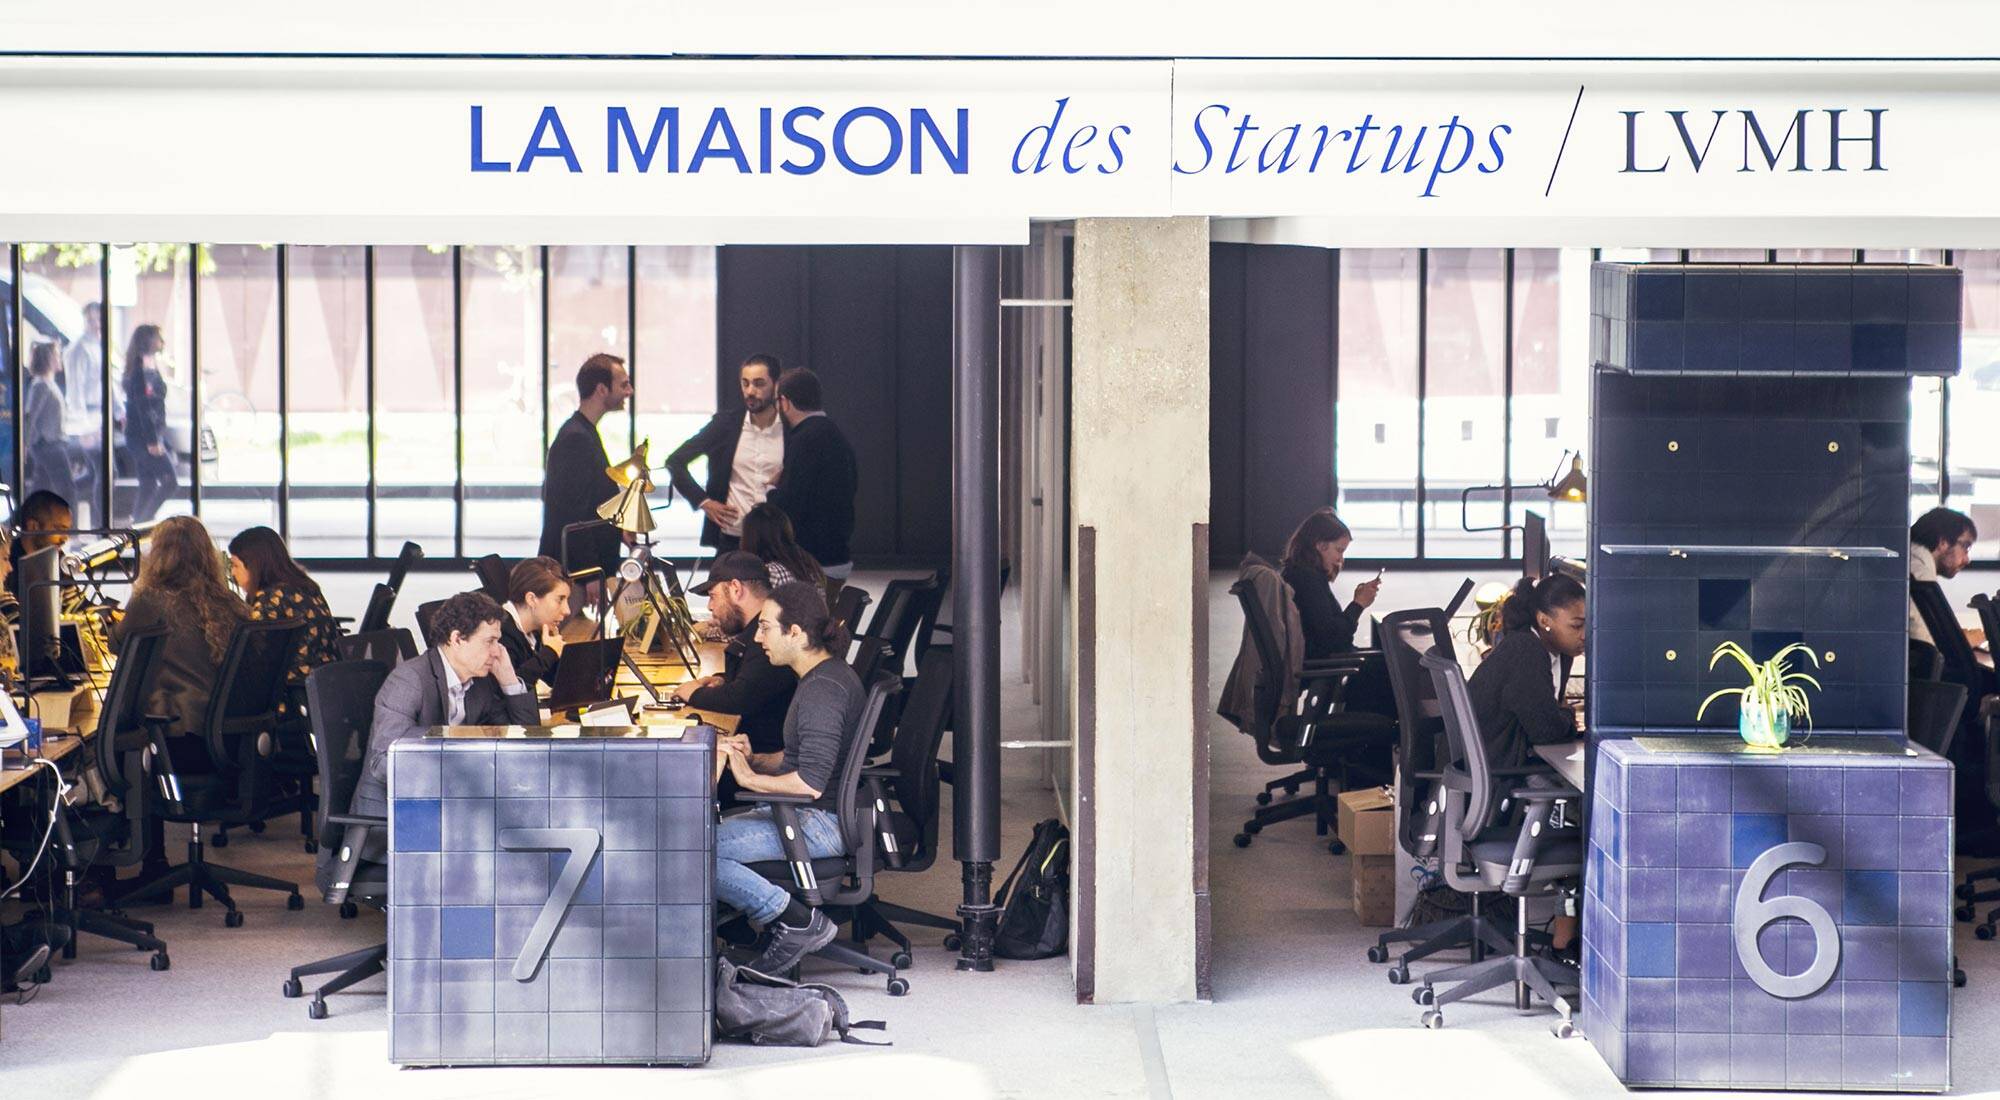 Tangiblee Invited to Participate in La Maison des Startups LVMH